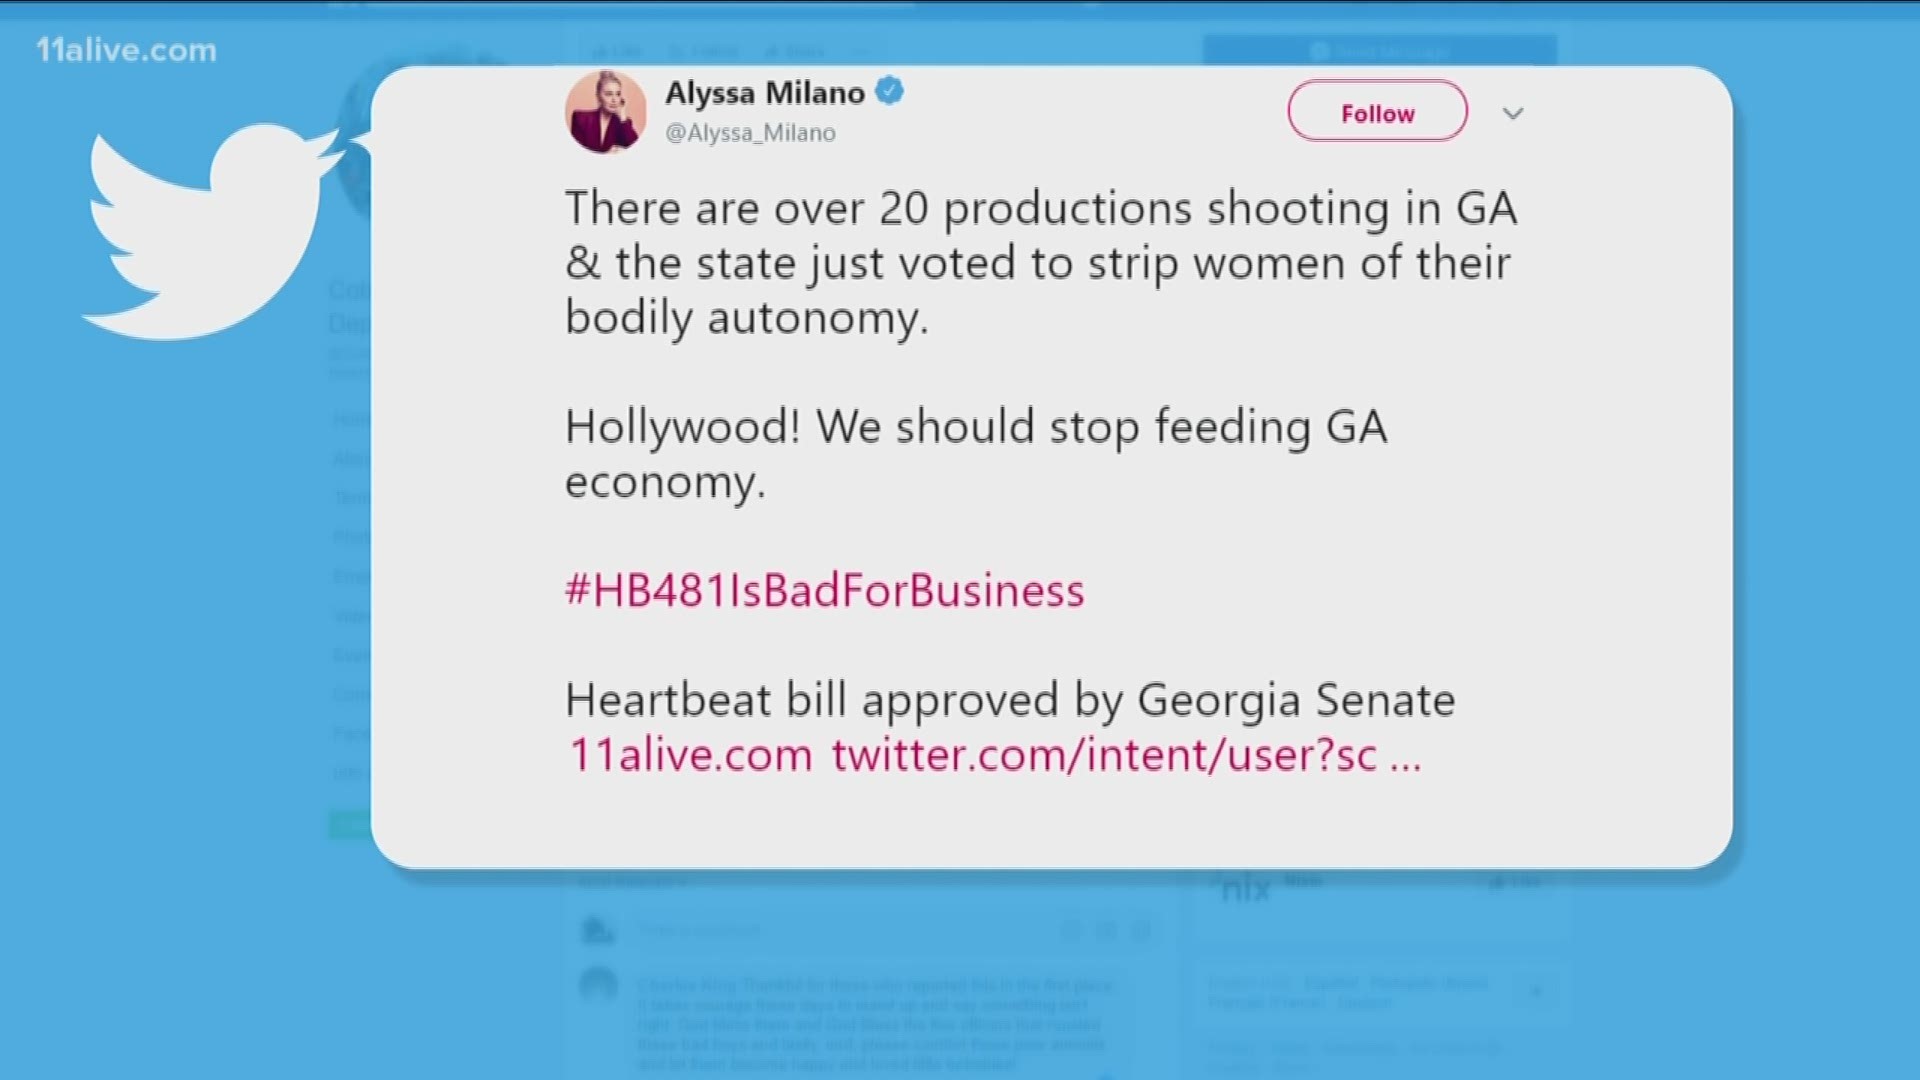 The actress had strong words for Georgia after the State Senate passed the 'Heartbeat' Bill which would restrict abortions after 6 weeks.